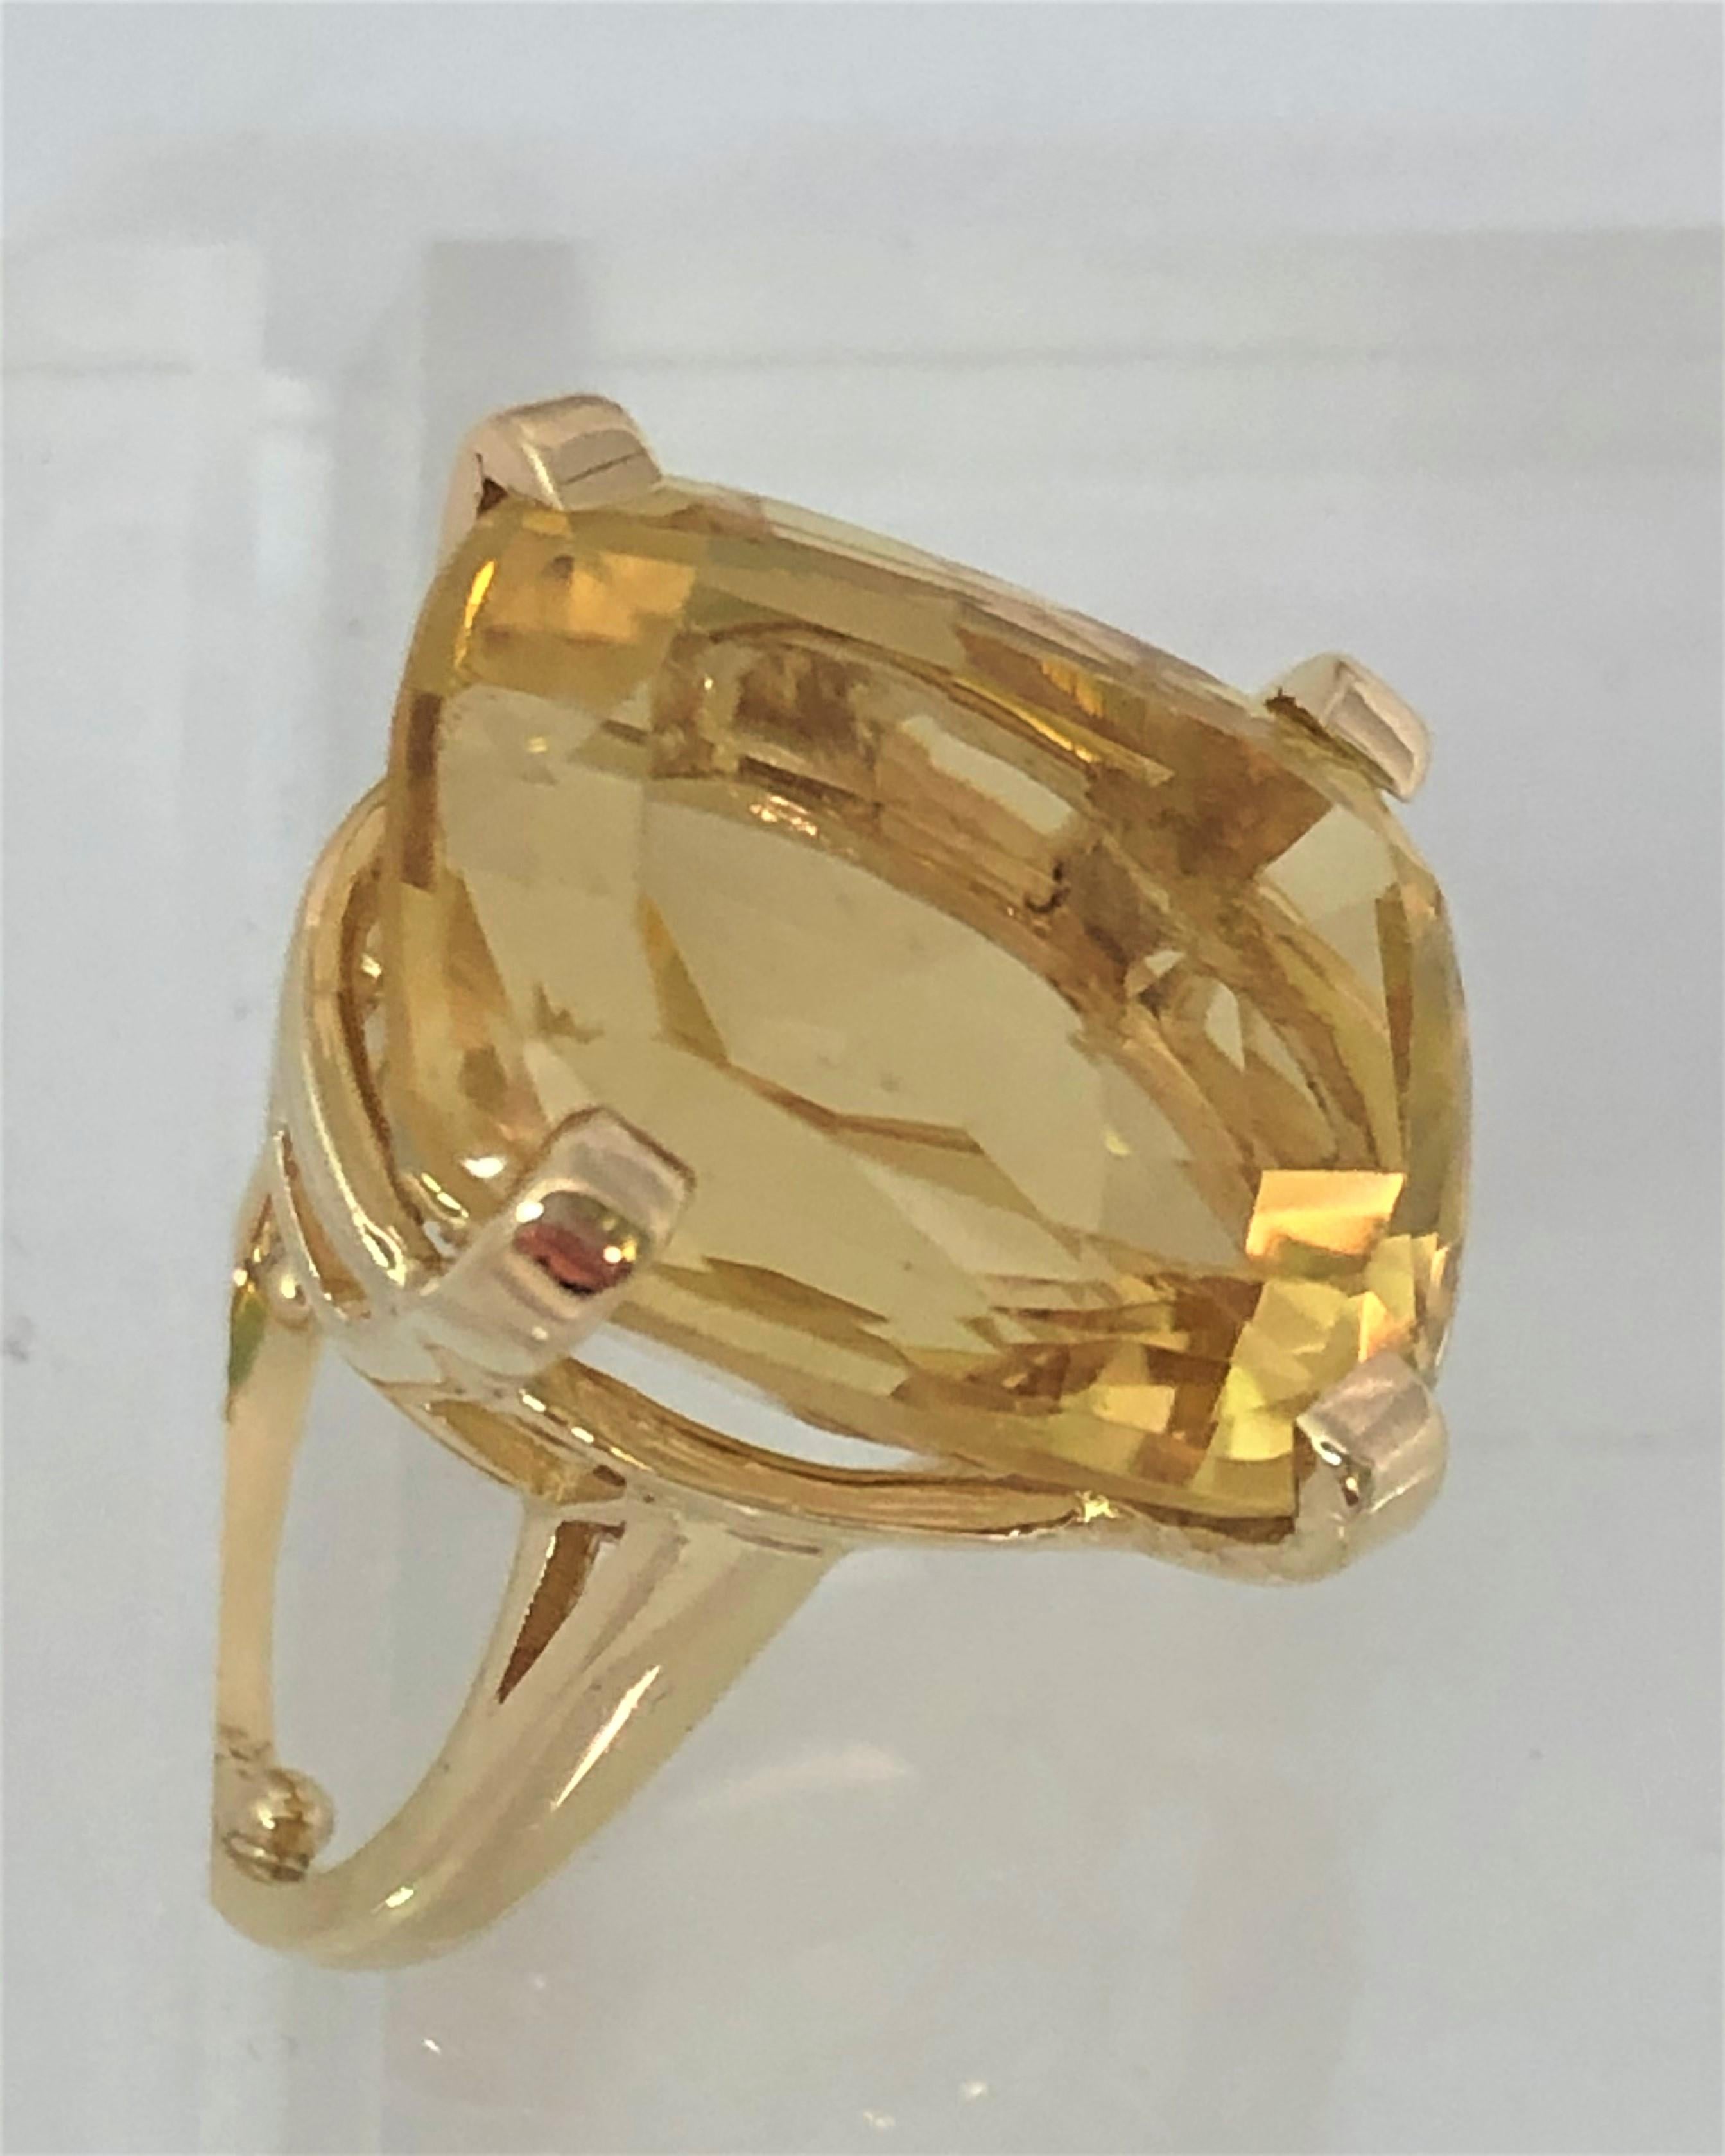 This ring will get noticed from across the room!
Approximately 19 carat, honey-colored Citrine mounted in a 4 prong basket setting
Citrine stone is approximately 20mm x 16.5mm x 11.8mm
14K yellow gold basket setting
Size 6 with sizing beads (fits